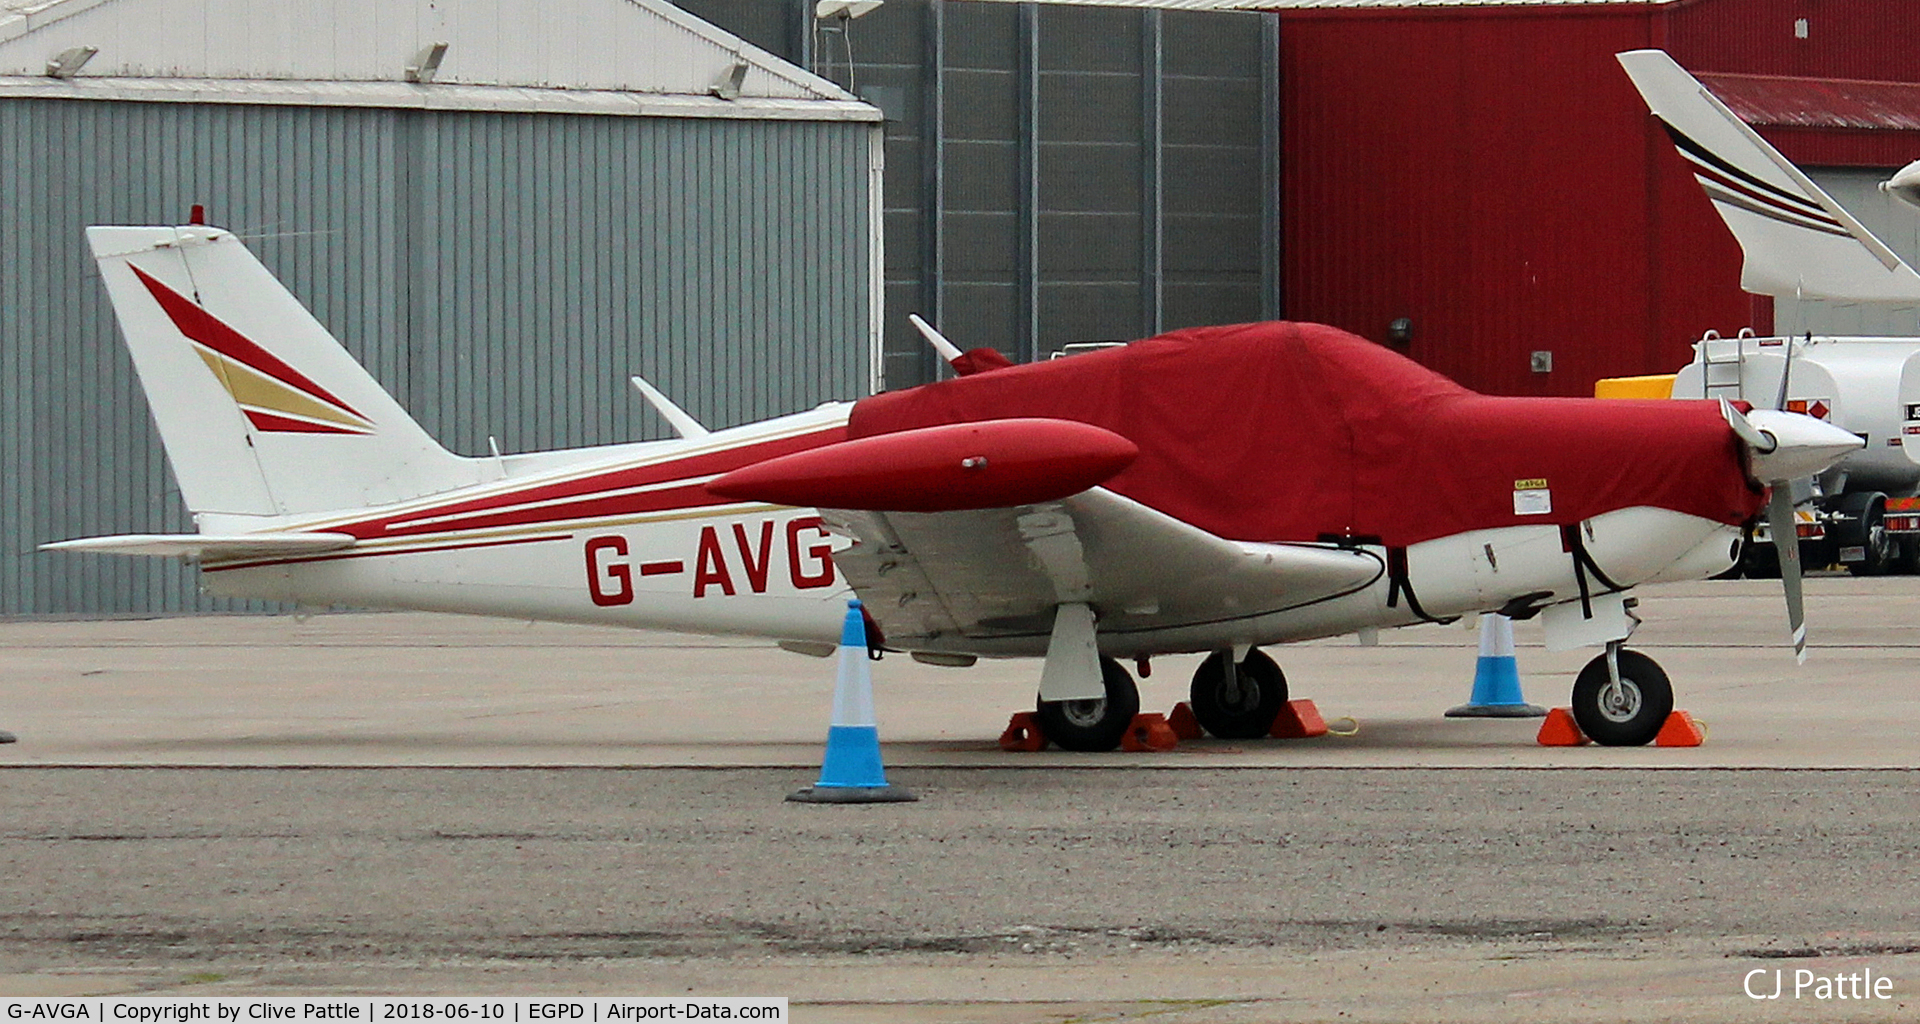 G-AVGA, 1966 Piper PA-24-260 Comanche B C/N 24-4489, Parked on the ramp at Aberdeen